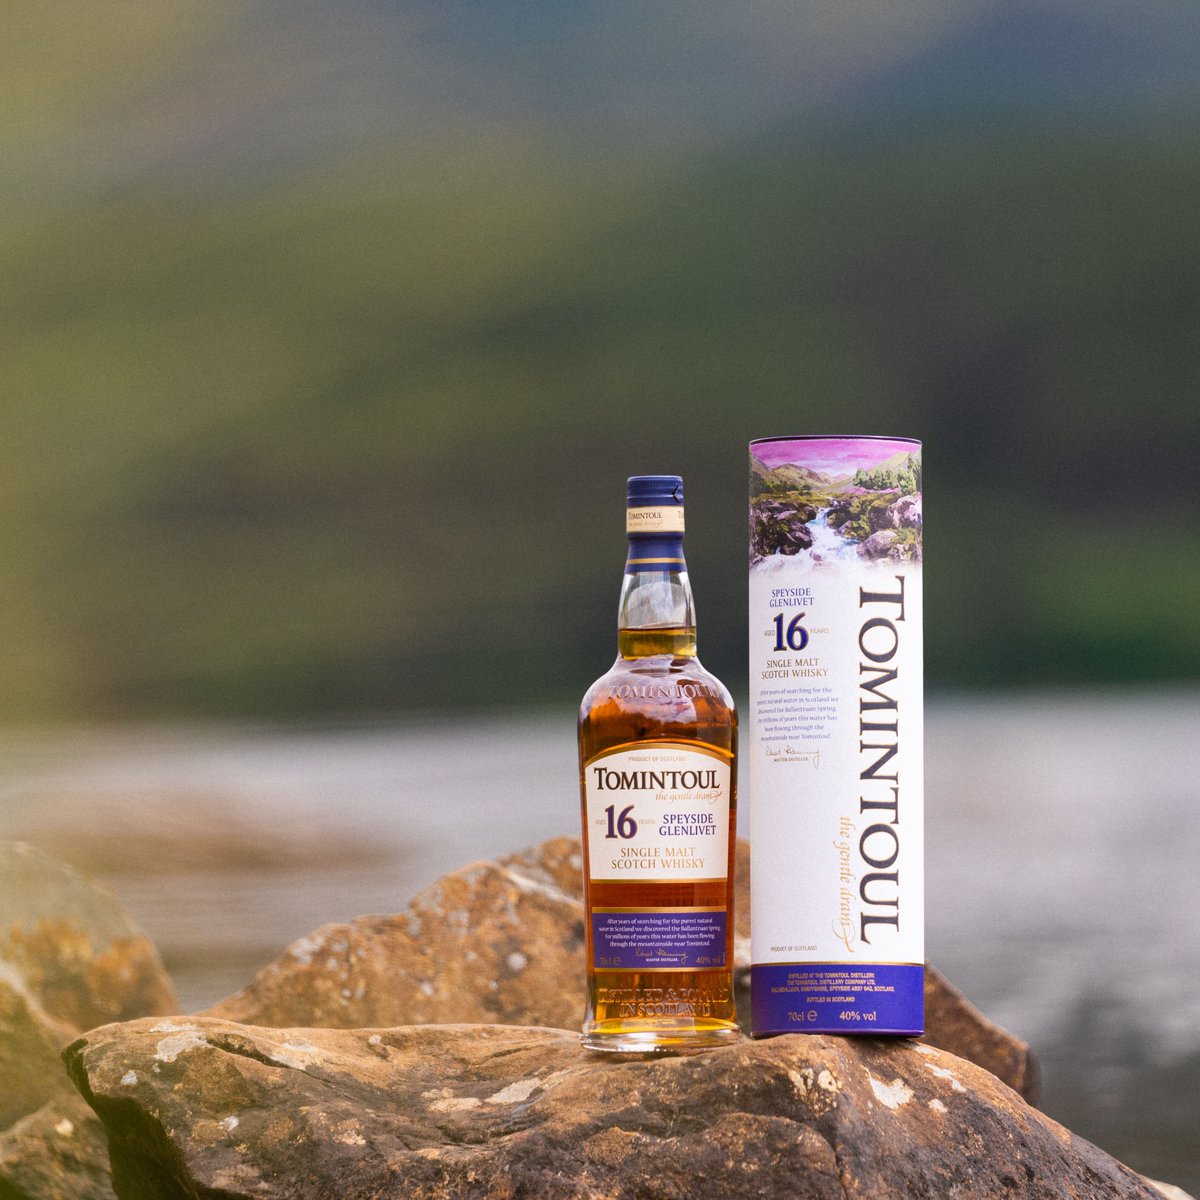 Our Tomintoul 16 Year is the quintessential offering from Tomintoul Distillery, offering soft and mellow notes of heather honey, soft nougat and vanilla fudge. This single malt is lovingly handcrafted in the heart of the Cairngorms National Park, using distilling techniques that